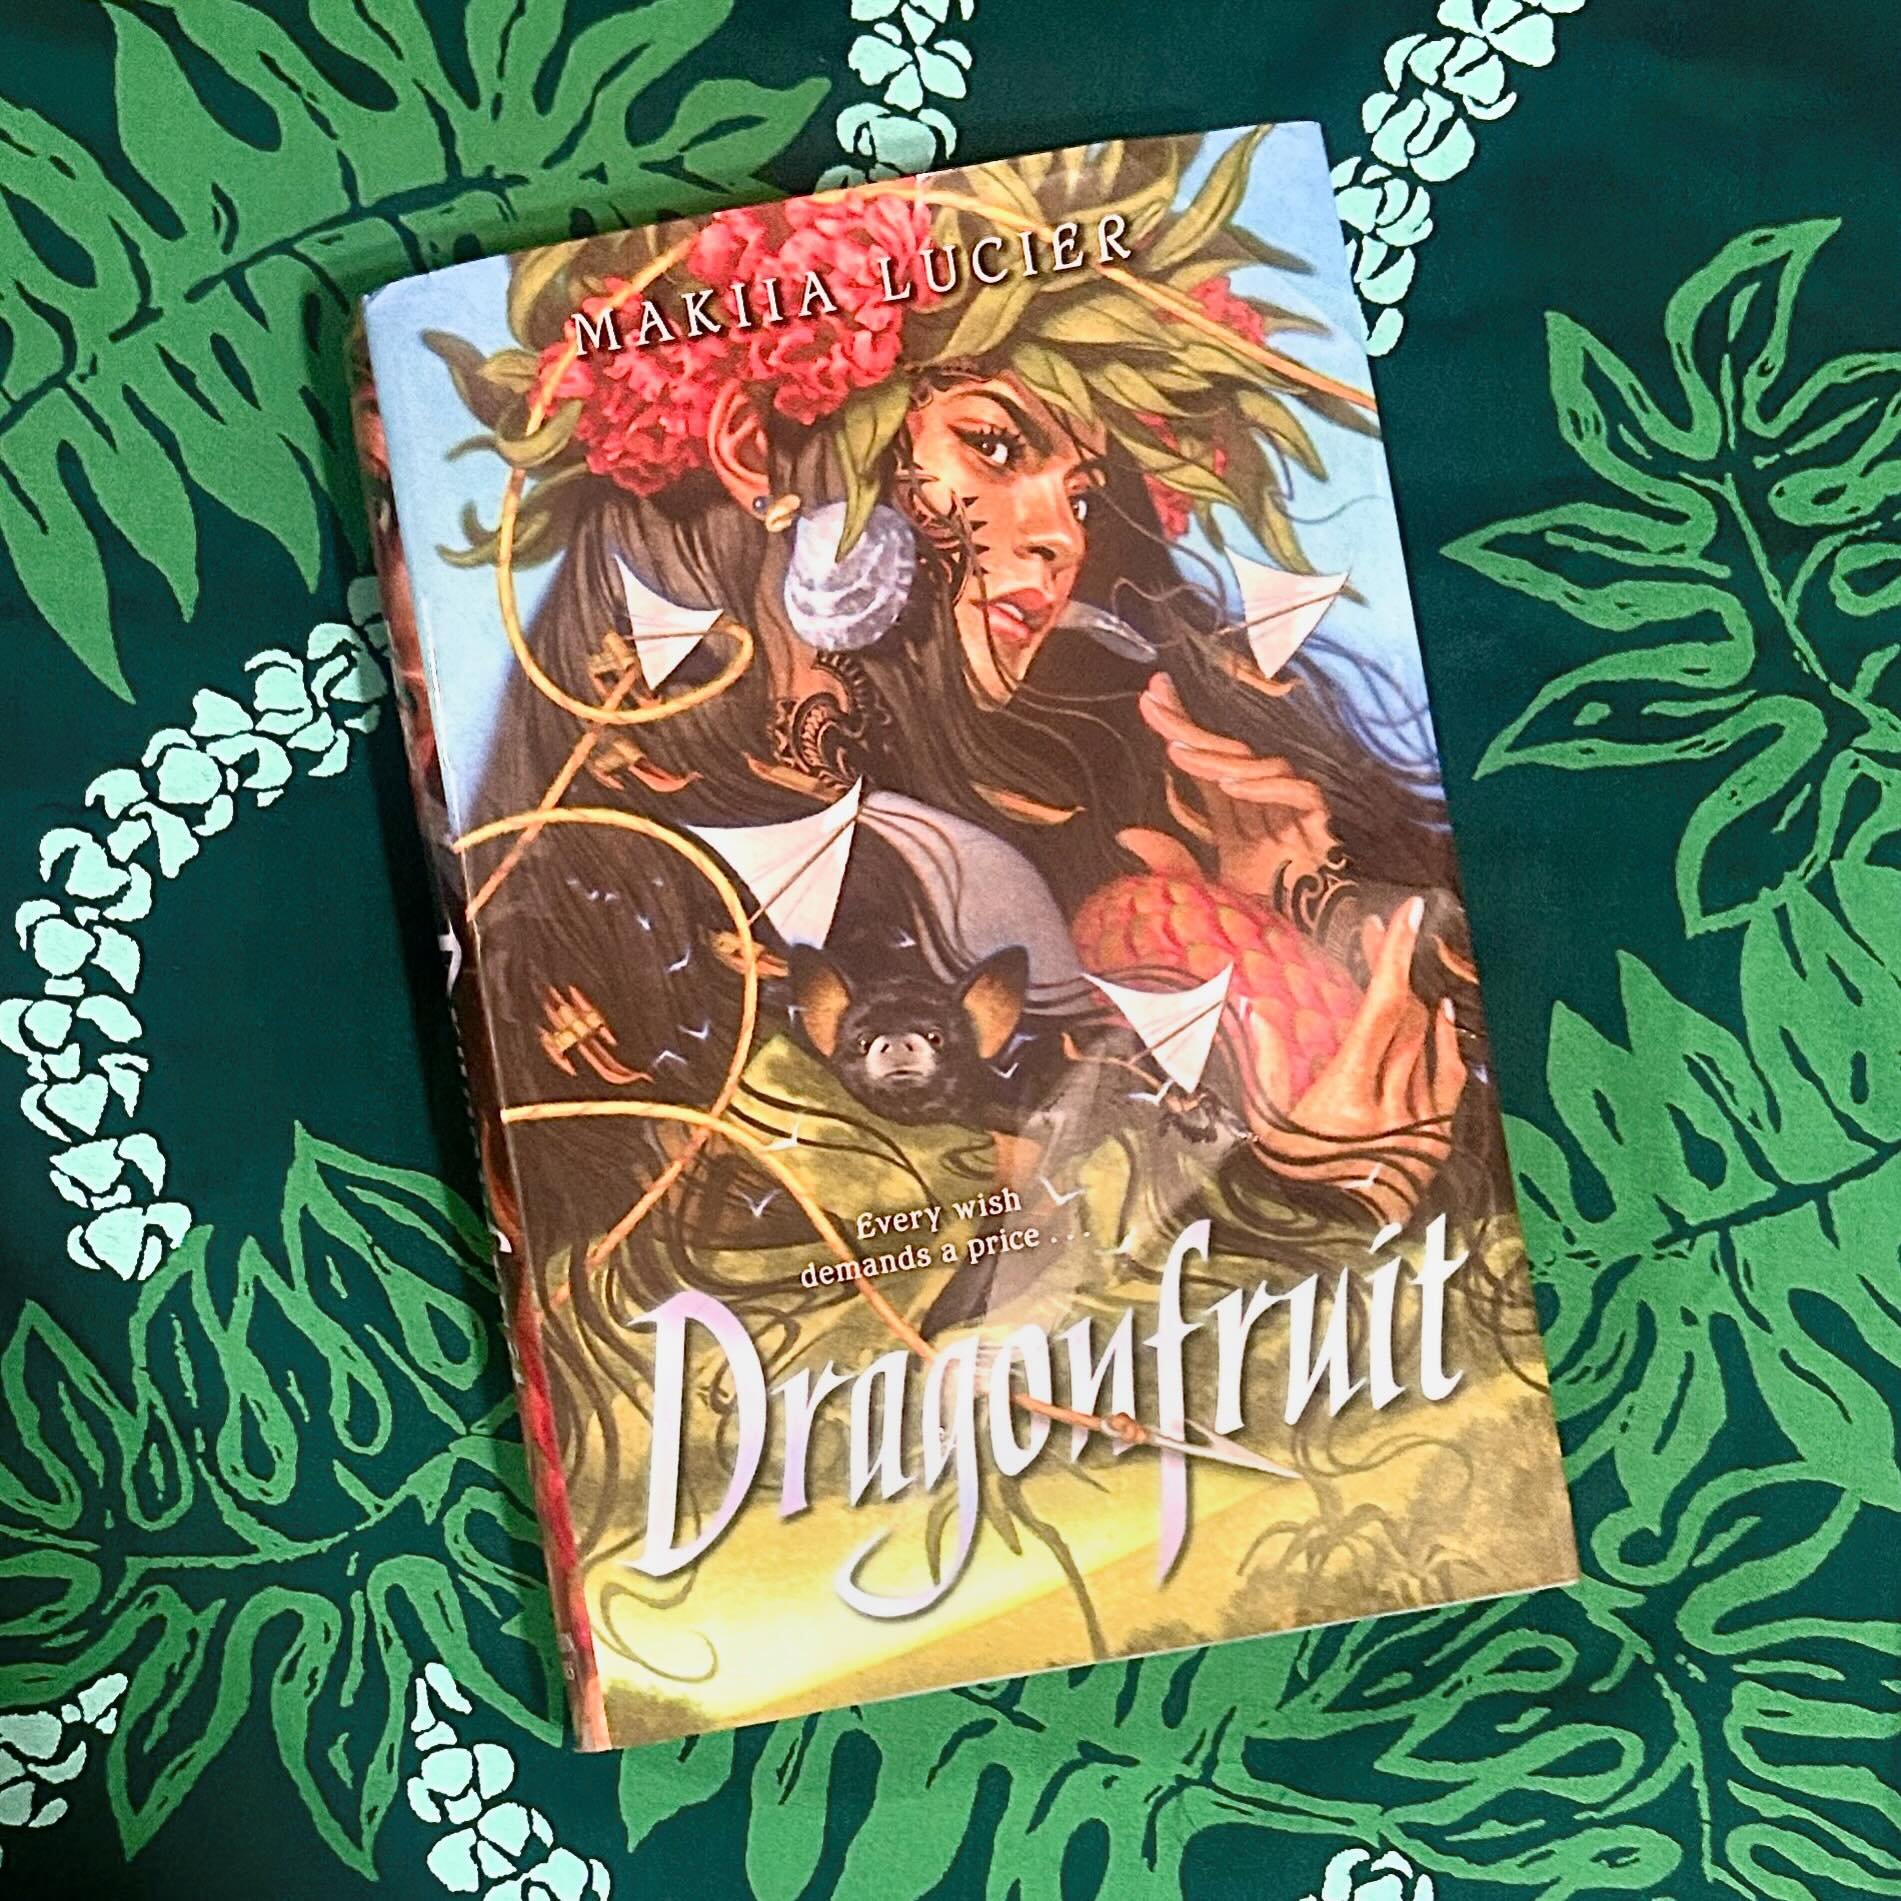 Dragonfruit by Makiia Lucier (CHamoru) is a young adult fantasy novel that tells the story of Hanalei who was exiled from her island home after her father stole a sea dragon egg meant to heal the island&rsquo;s princess. When Hanalei unintentionally 